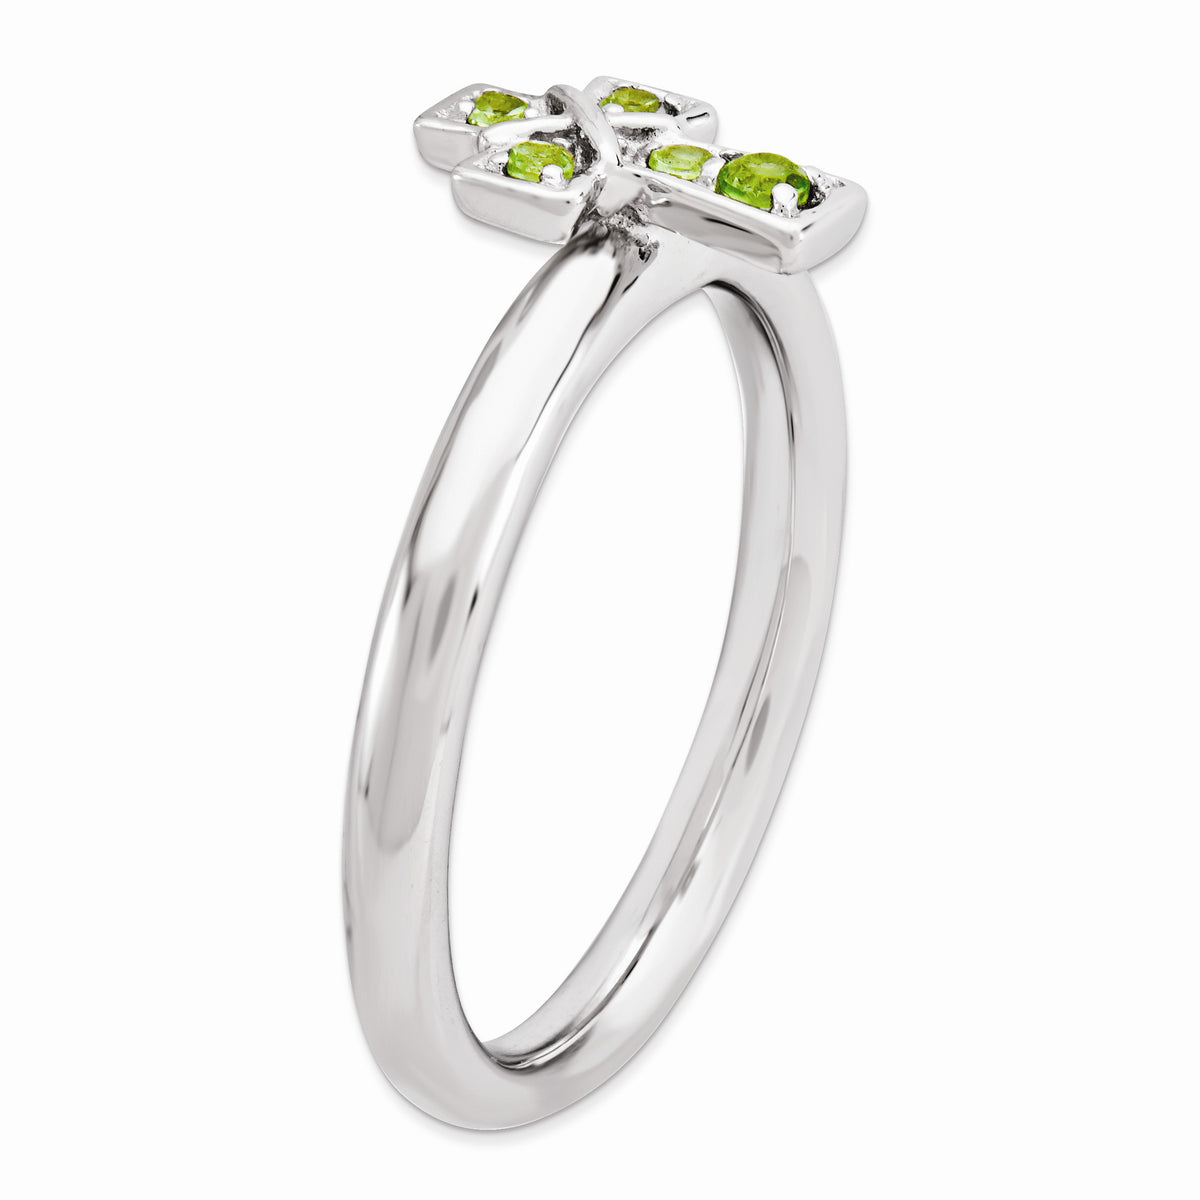 Alternate view of the Rhodium Plated Sterling Silver Stackable Peridot 9mm Cross Ring by The Black Bow Jewelry Co.